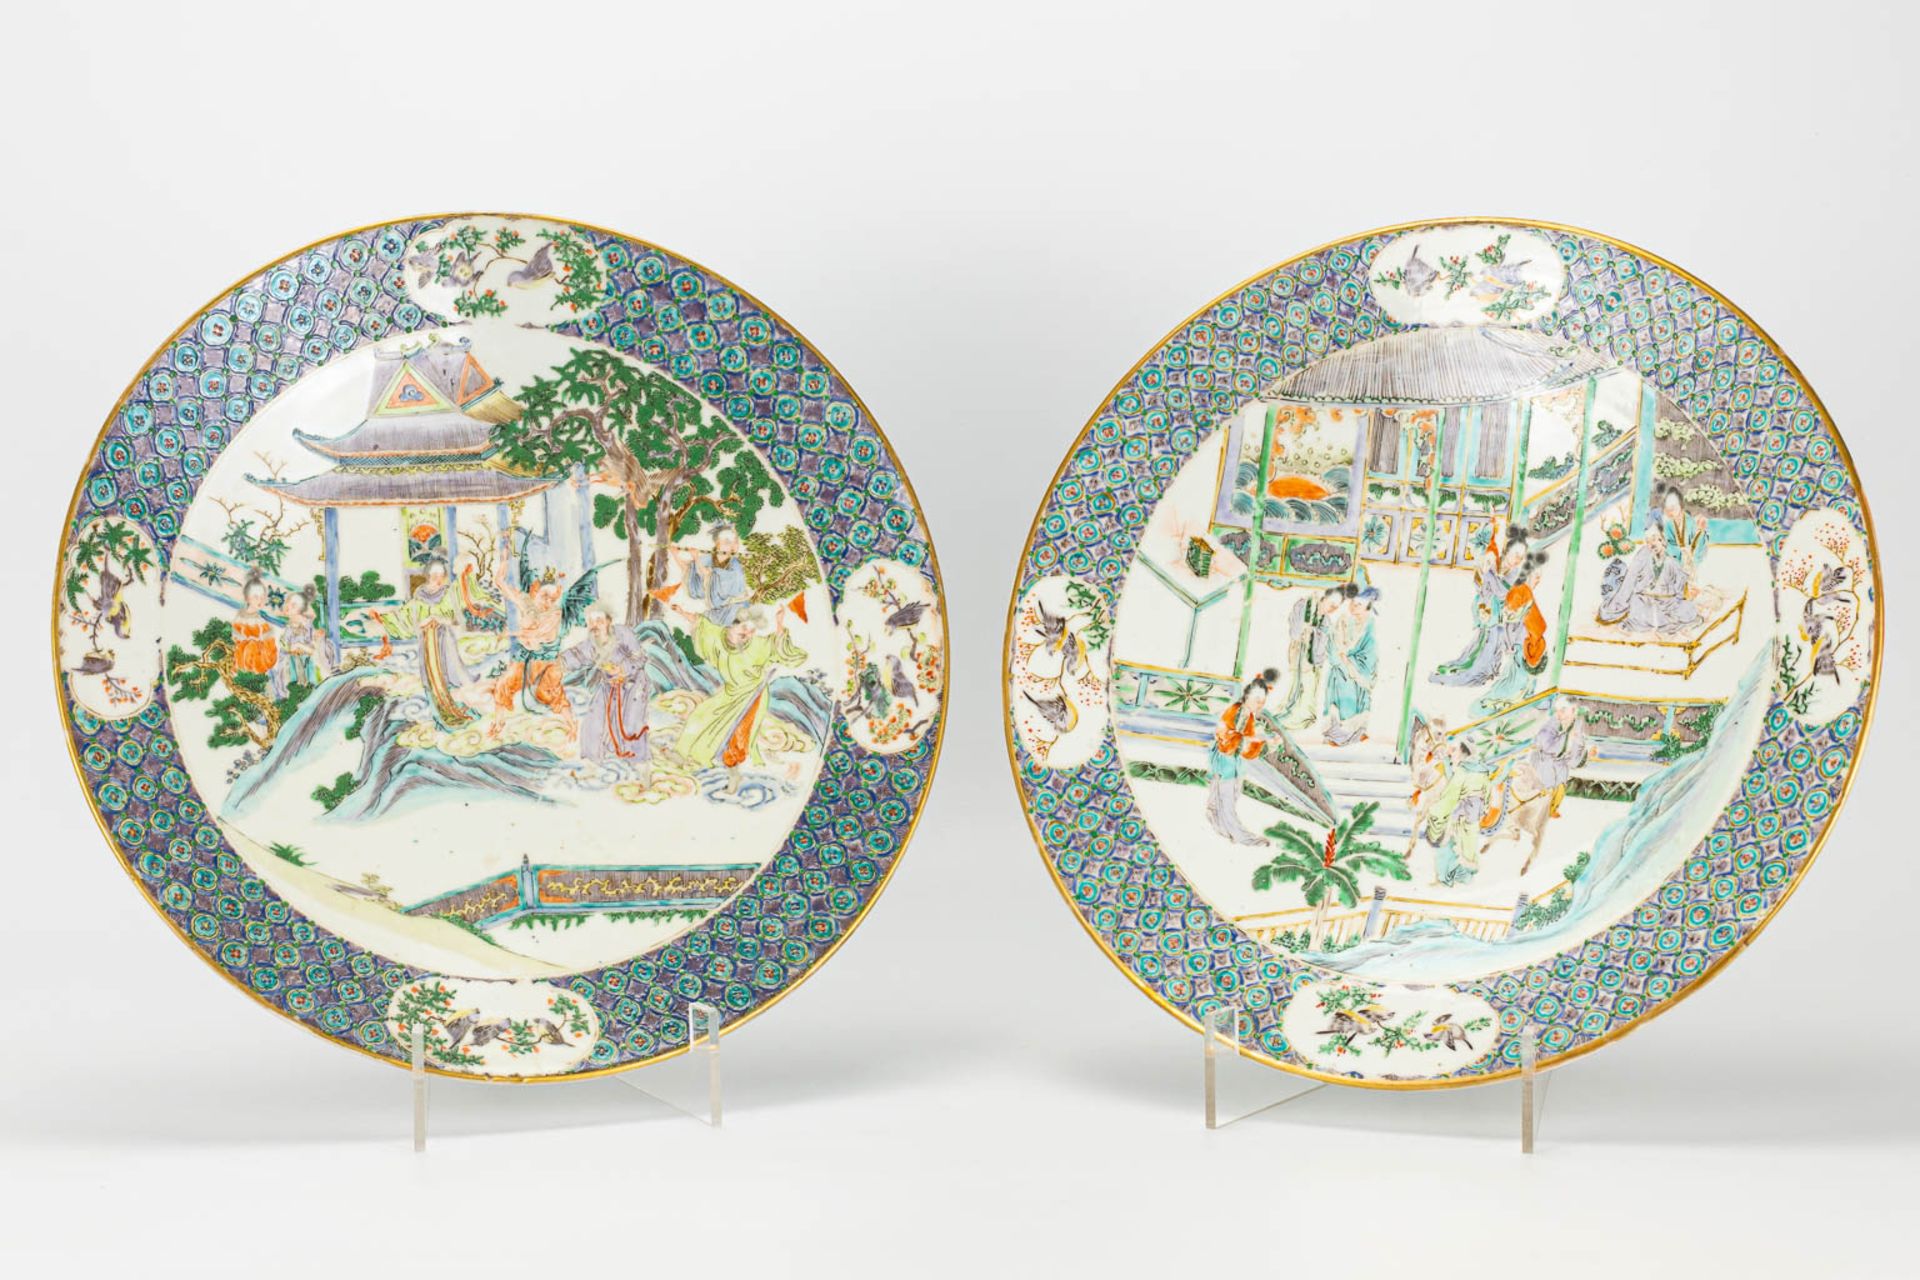 A pair of plates made of Chinese porcelain in Kanton style. 19th century. - Image 15 of 24